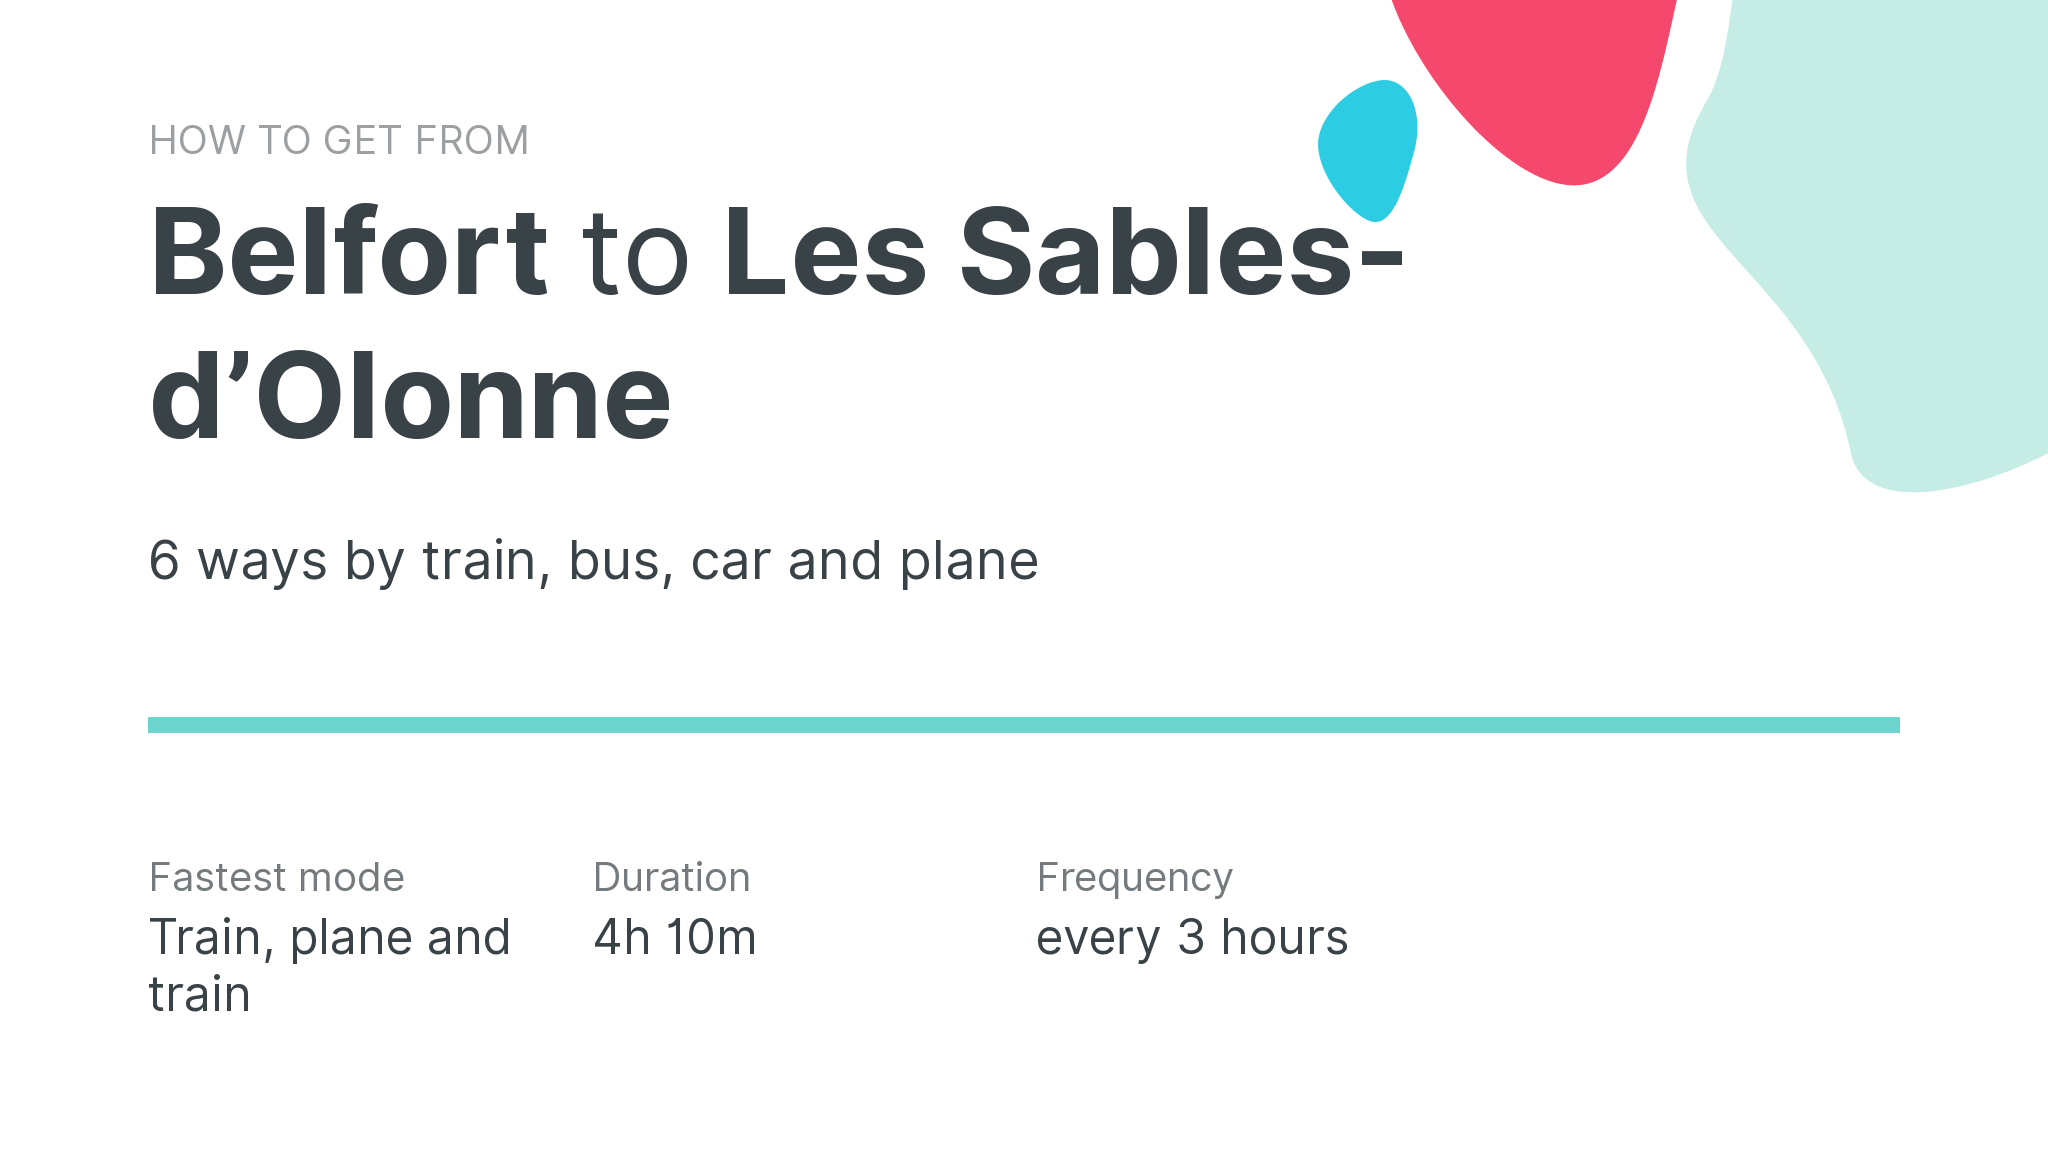 How do I get from Belfort to Les Sables-dʼOlonne